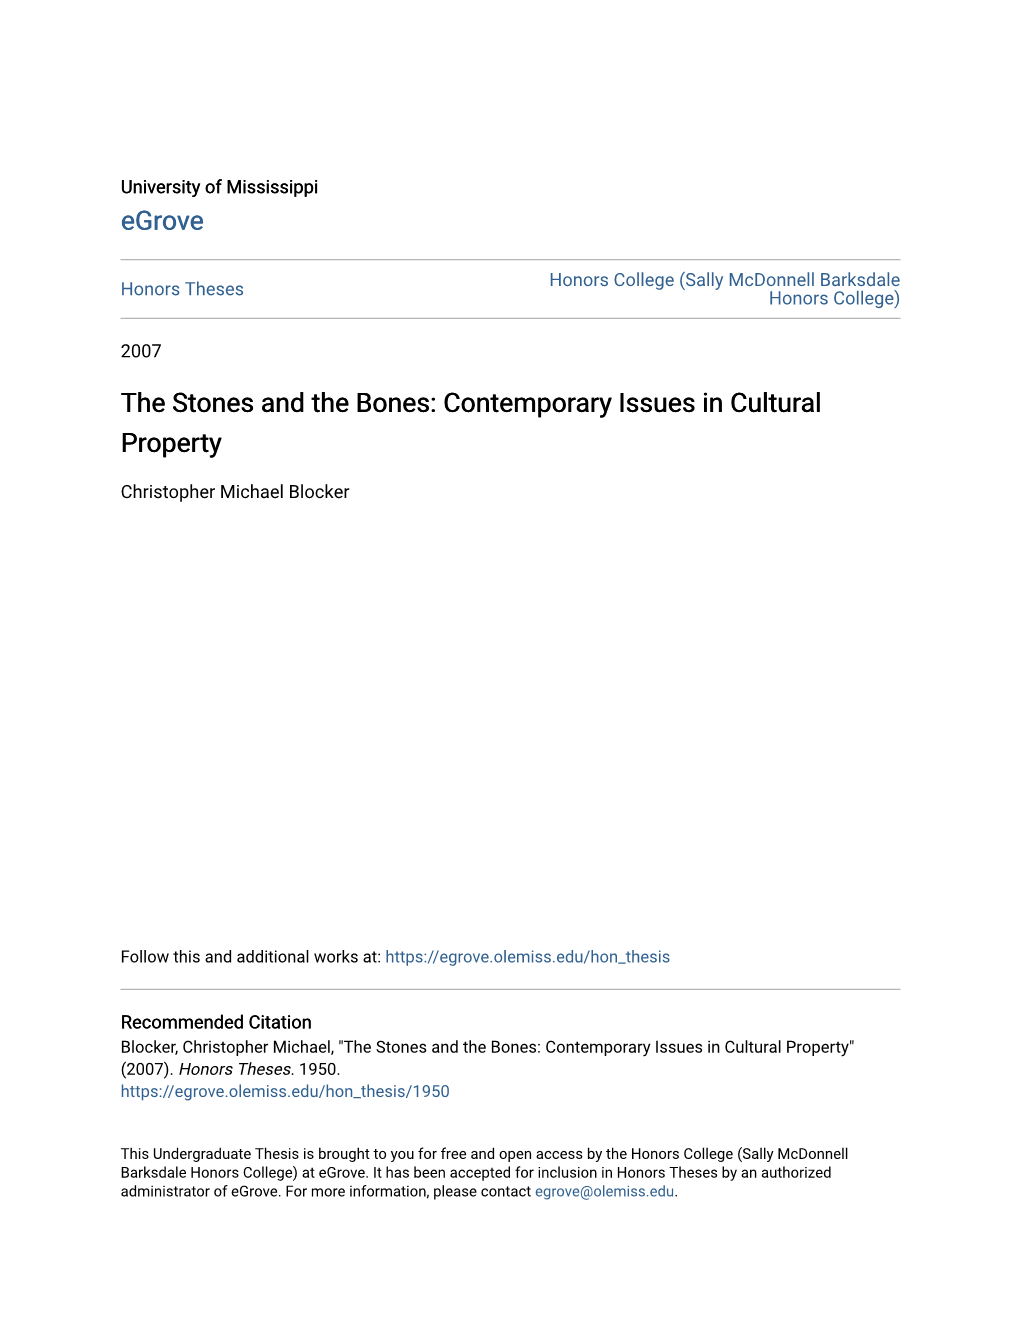 The Stones and the Bones: Contemporary Issues in Cultural Property